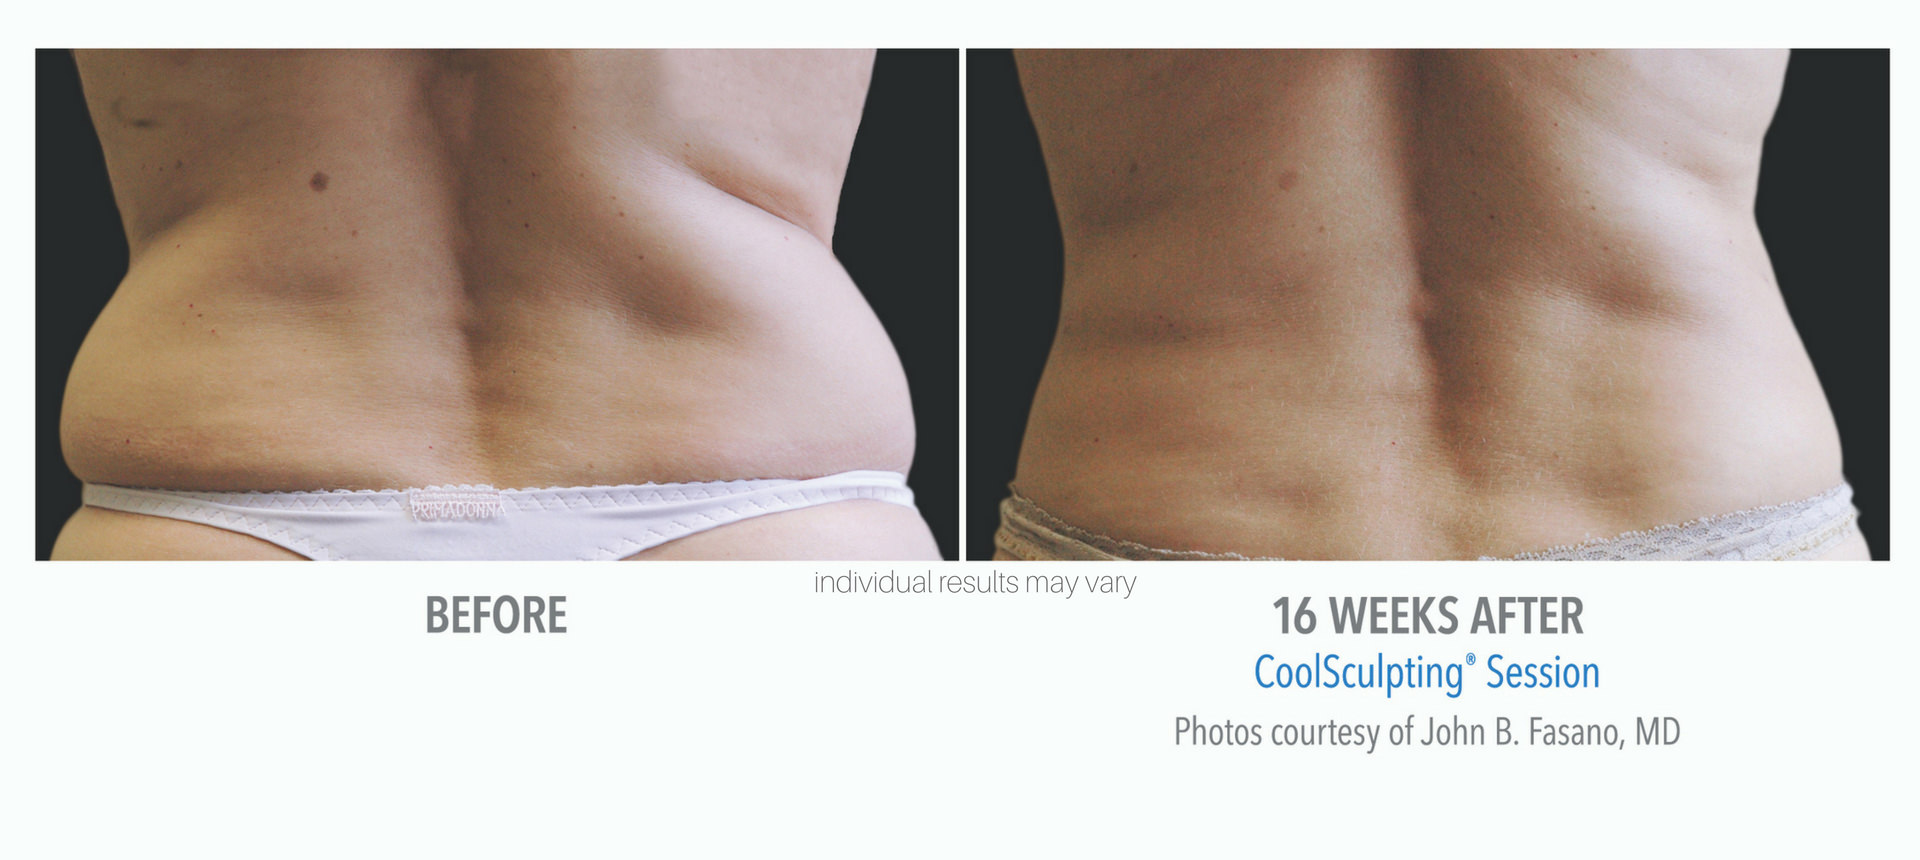 coolsculpting-before-and-after-photos-3